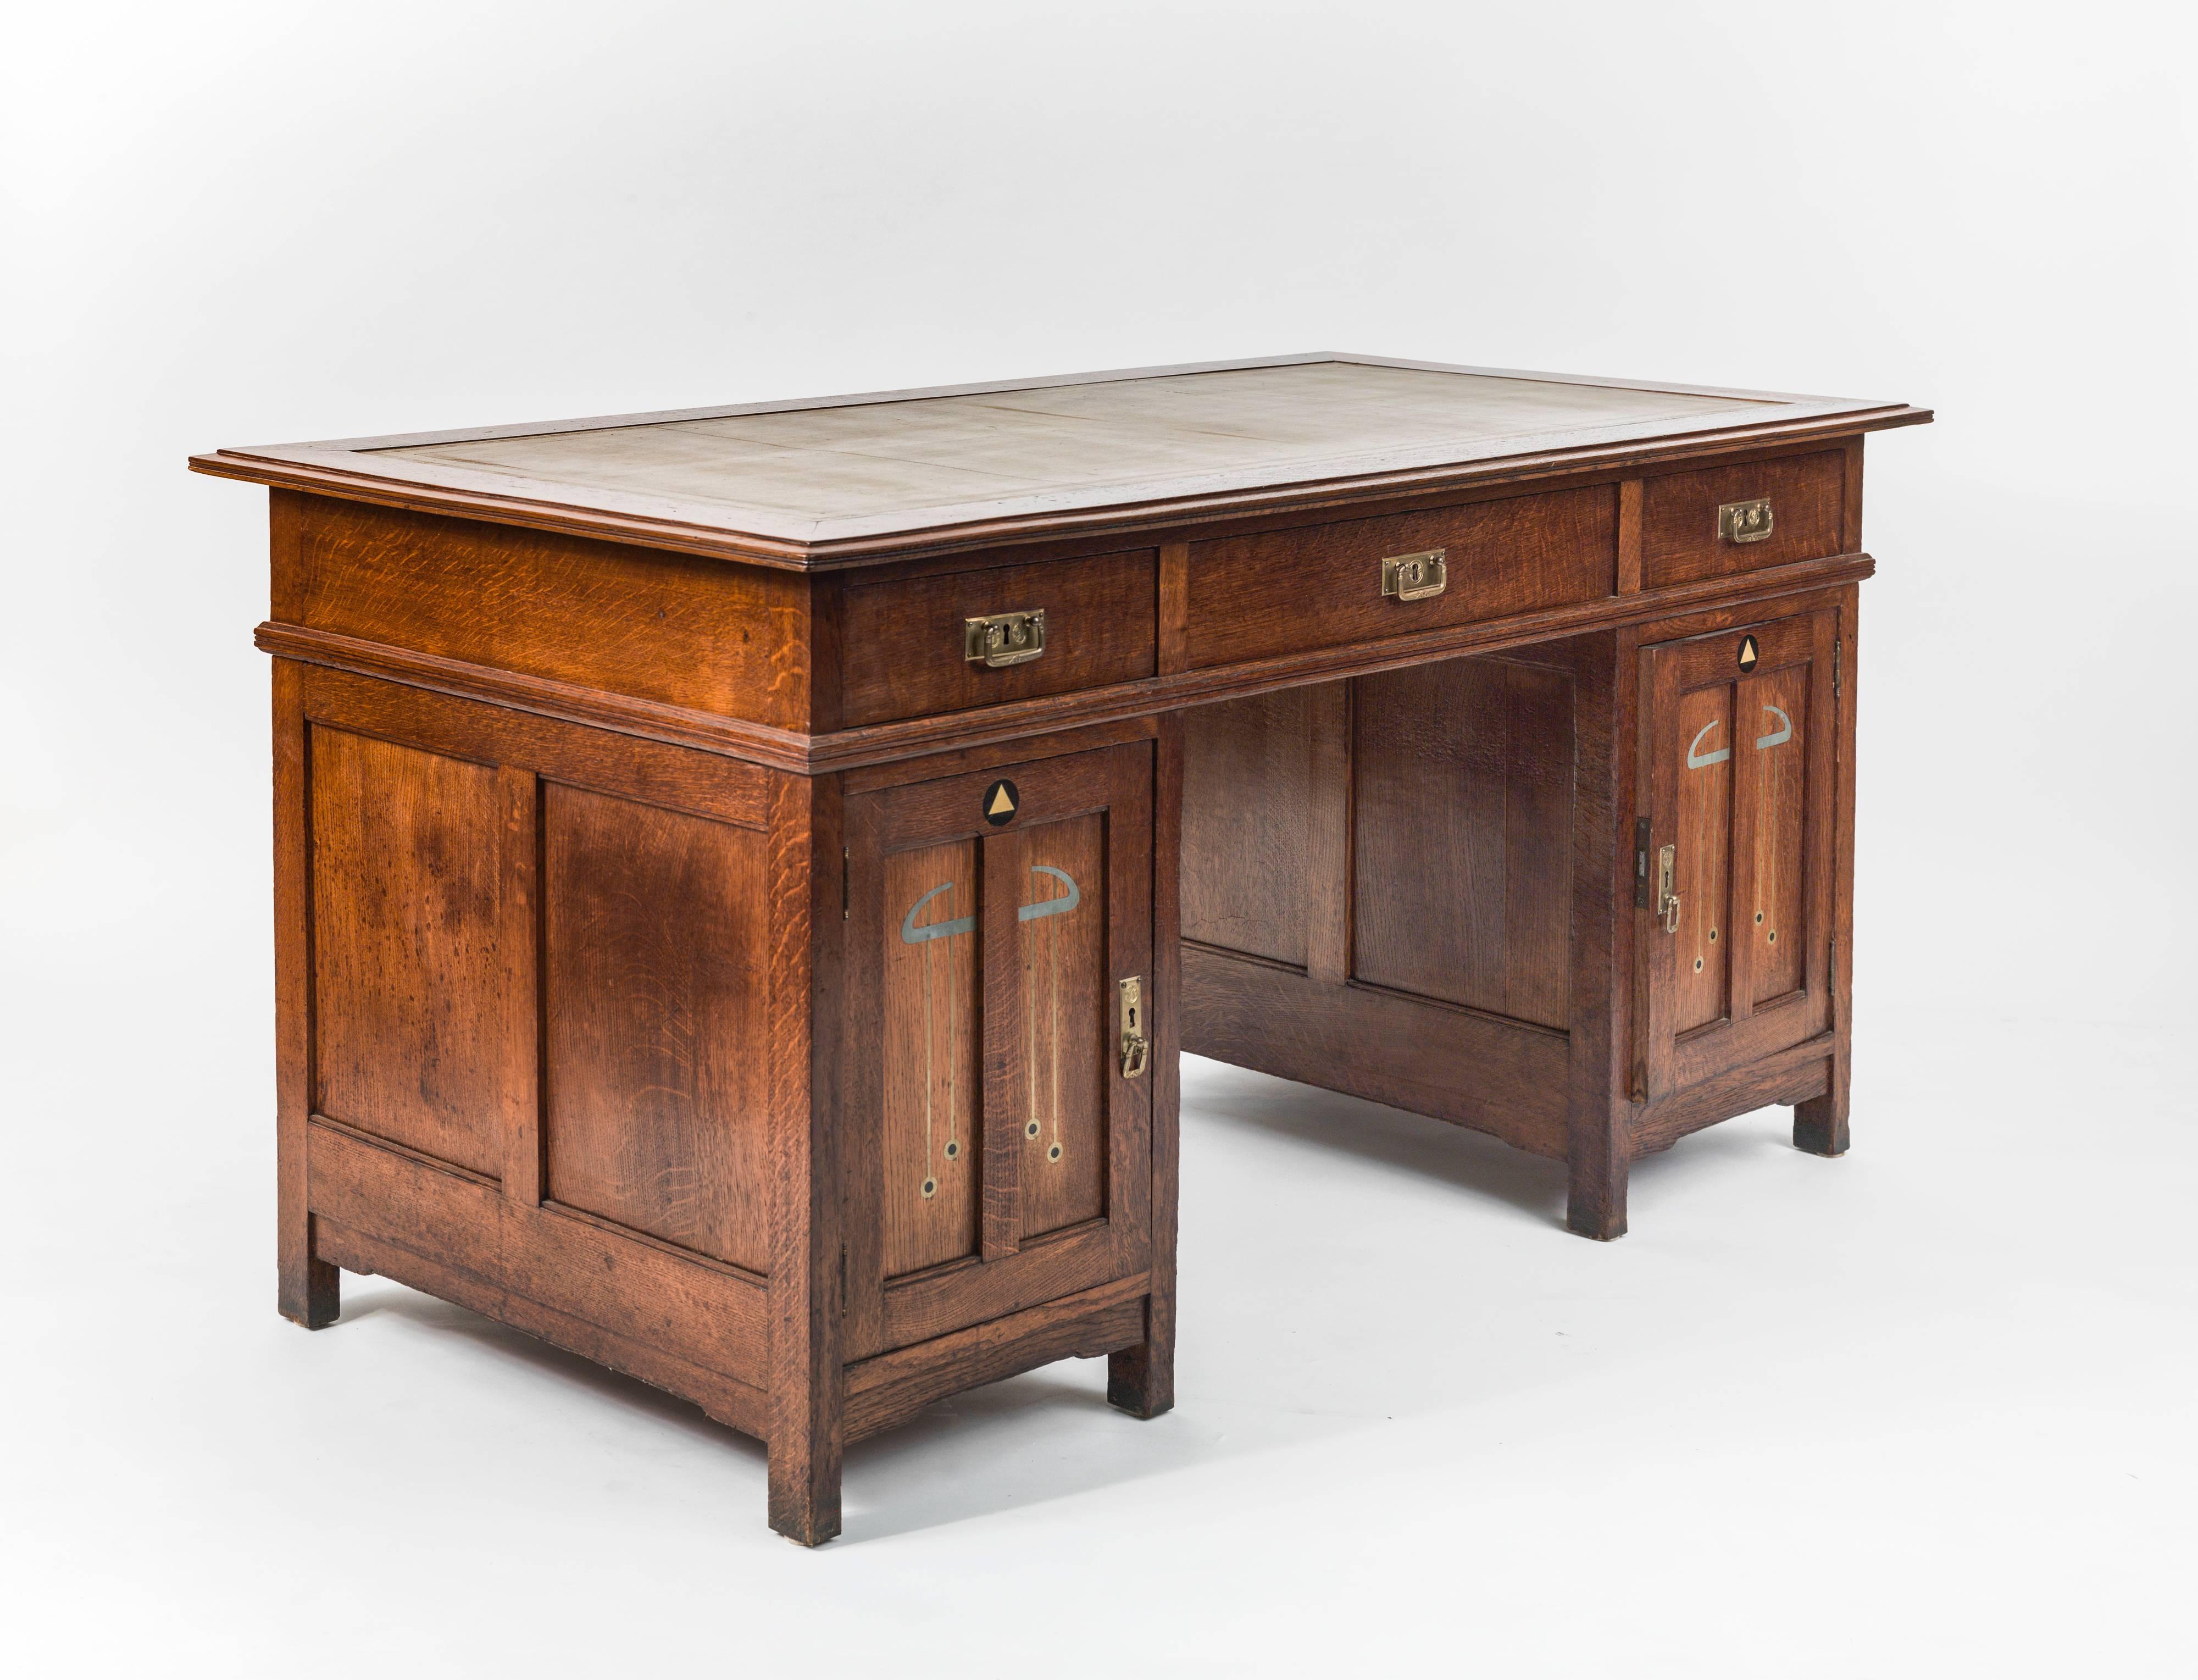 A Secessionist period oak pedestal desk, the apron fitted with three drawers; the pedestals inlaid front and back with period motifs in brass and pewter, the left pedestal arranged with vertical dividers for filing, the right pedestal fitted with